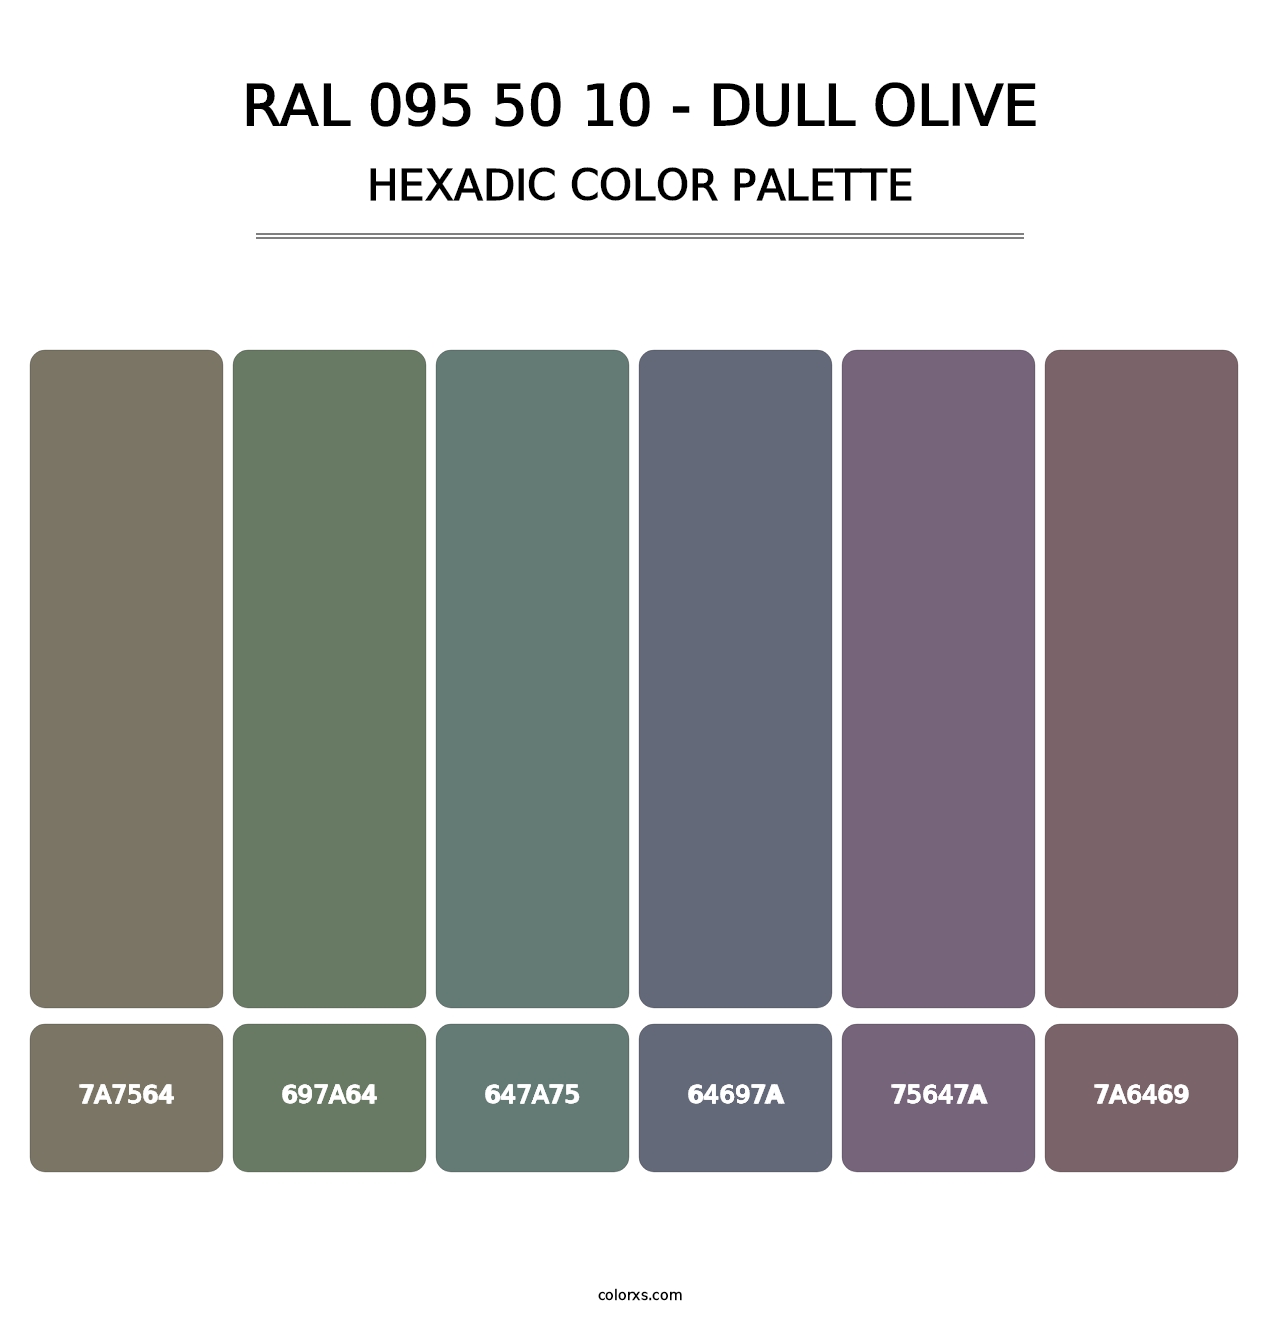 RAL 095 50 10 - Dull Olive - Hexadic Color Palette